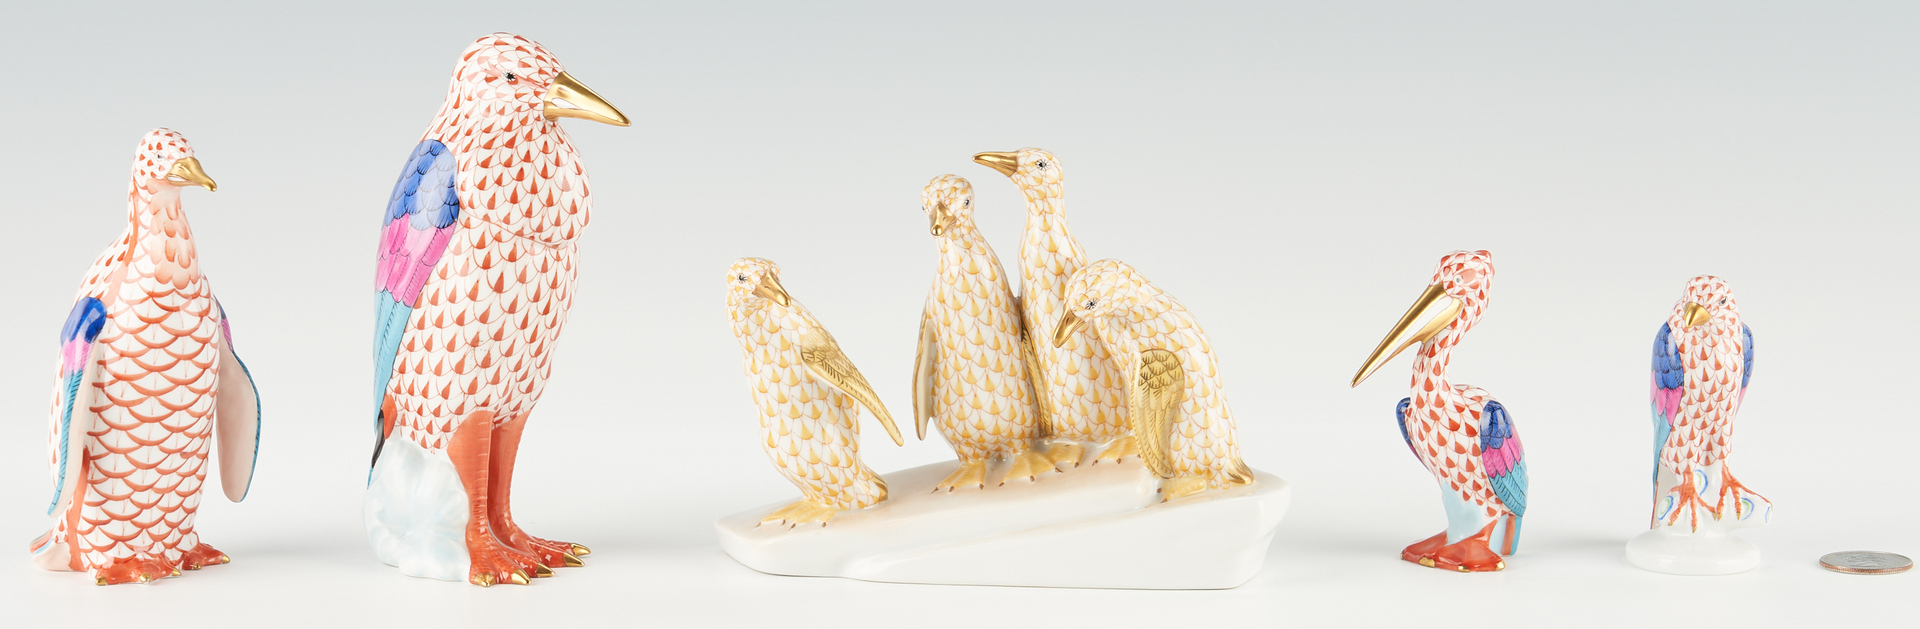 Lot 345: 5 Herend Bird Porcelain Figurines, incl. Penguins on Ice